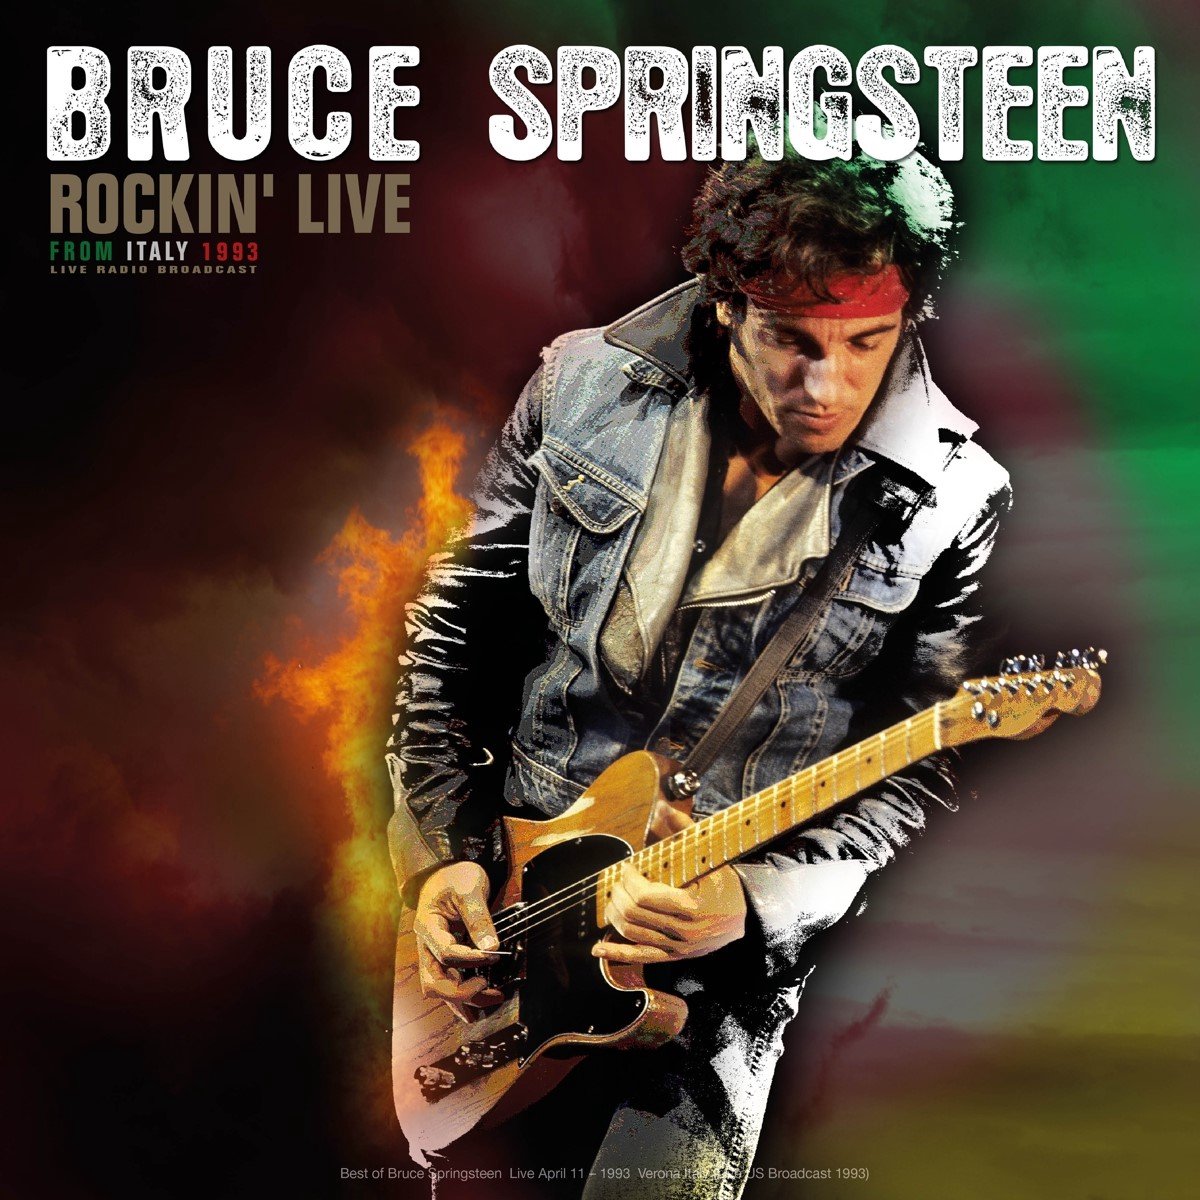 Best of Rockin' Live from Italy 1983 Live Radio Broadcast (LP) - Bruce Springsteen